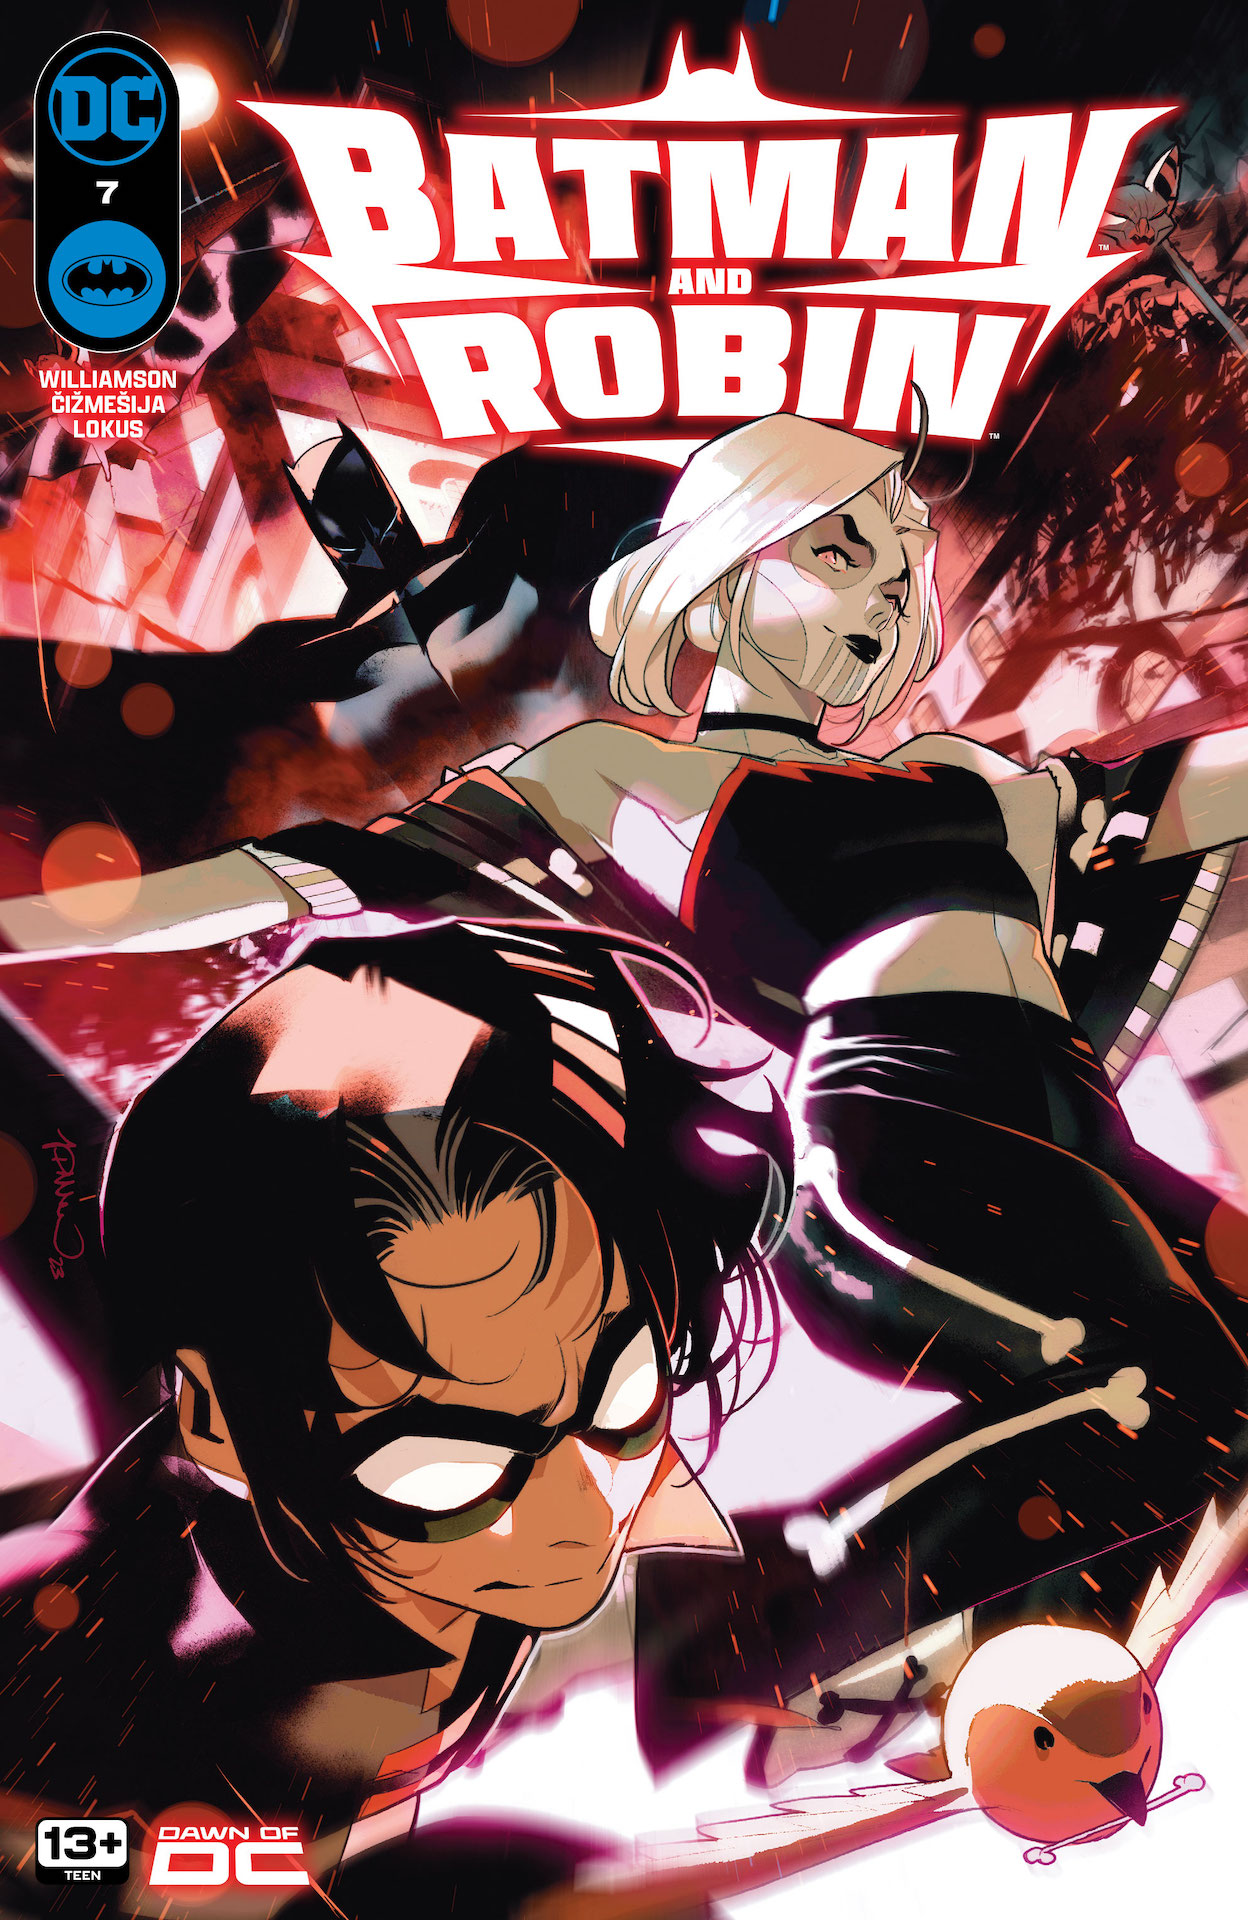 DC Preview: Batman and Robin #7